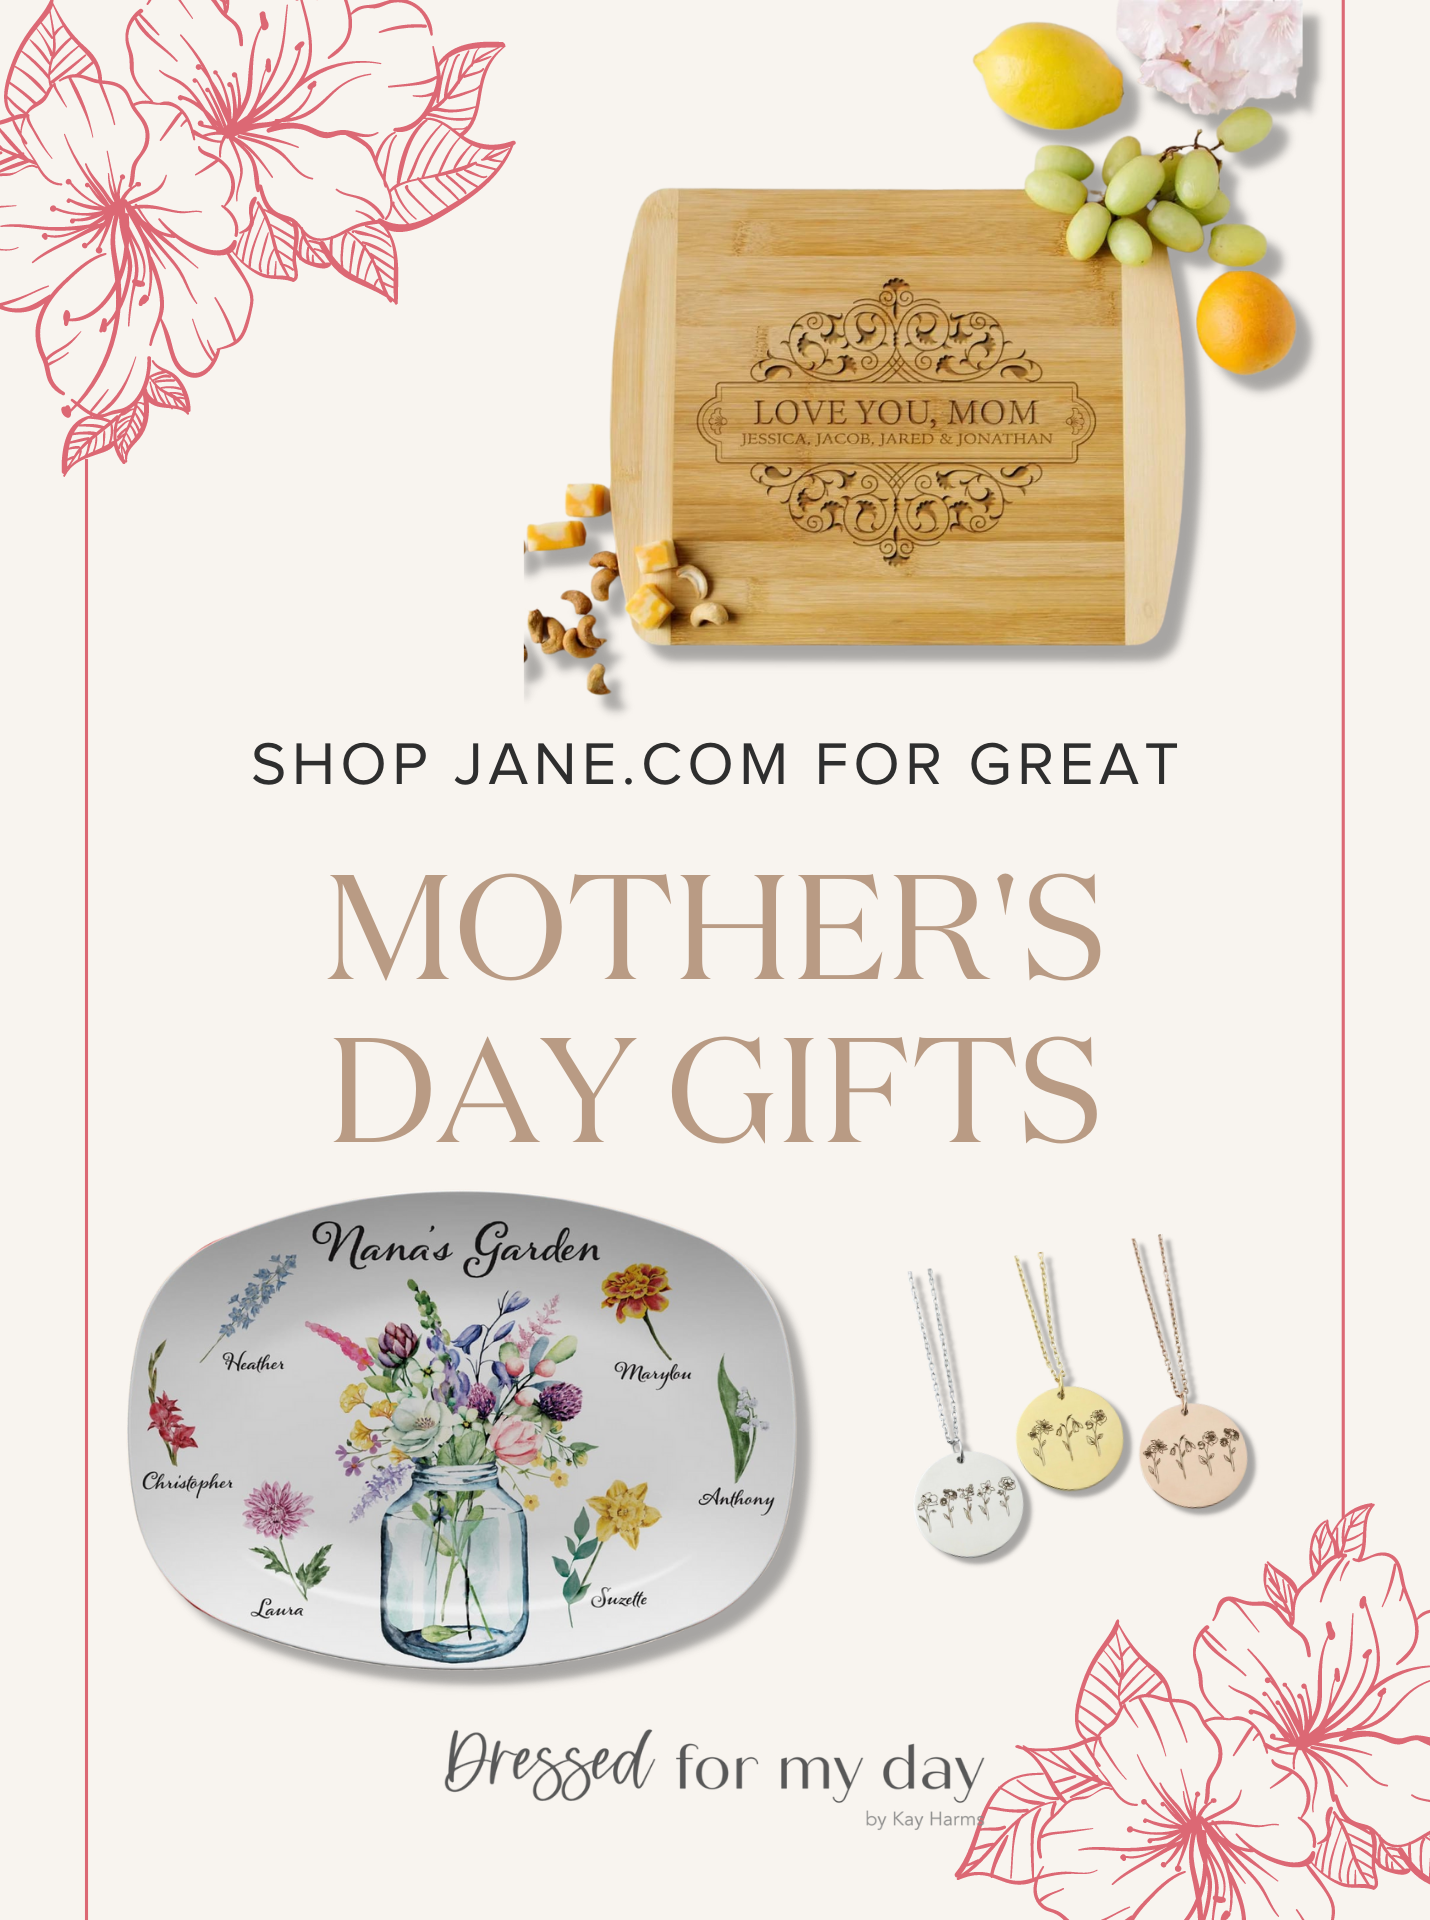 Customized Mother's Day Gifts at Jane.com